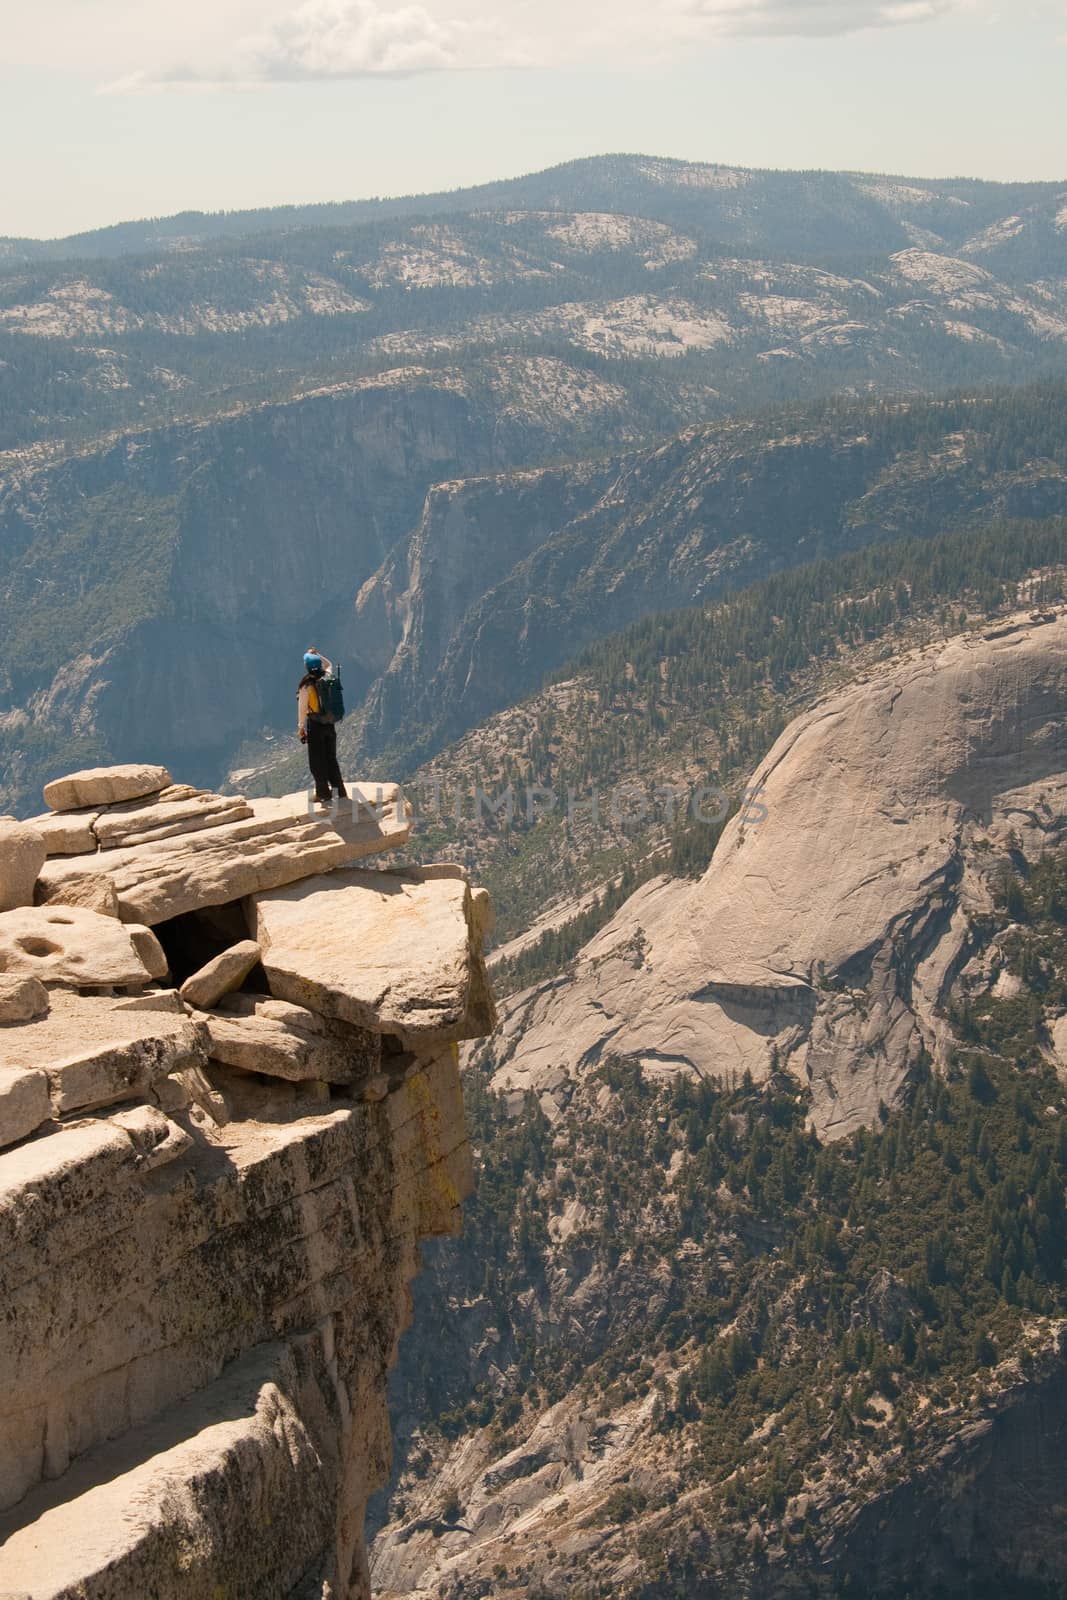 A view from the Half Dome in Yosemite National Park in California.